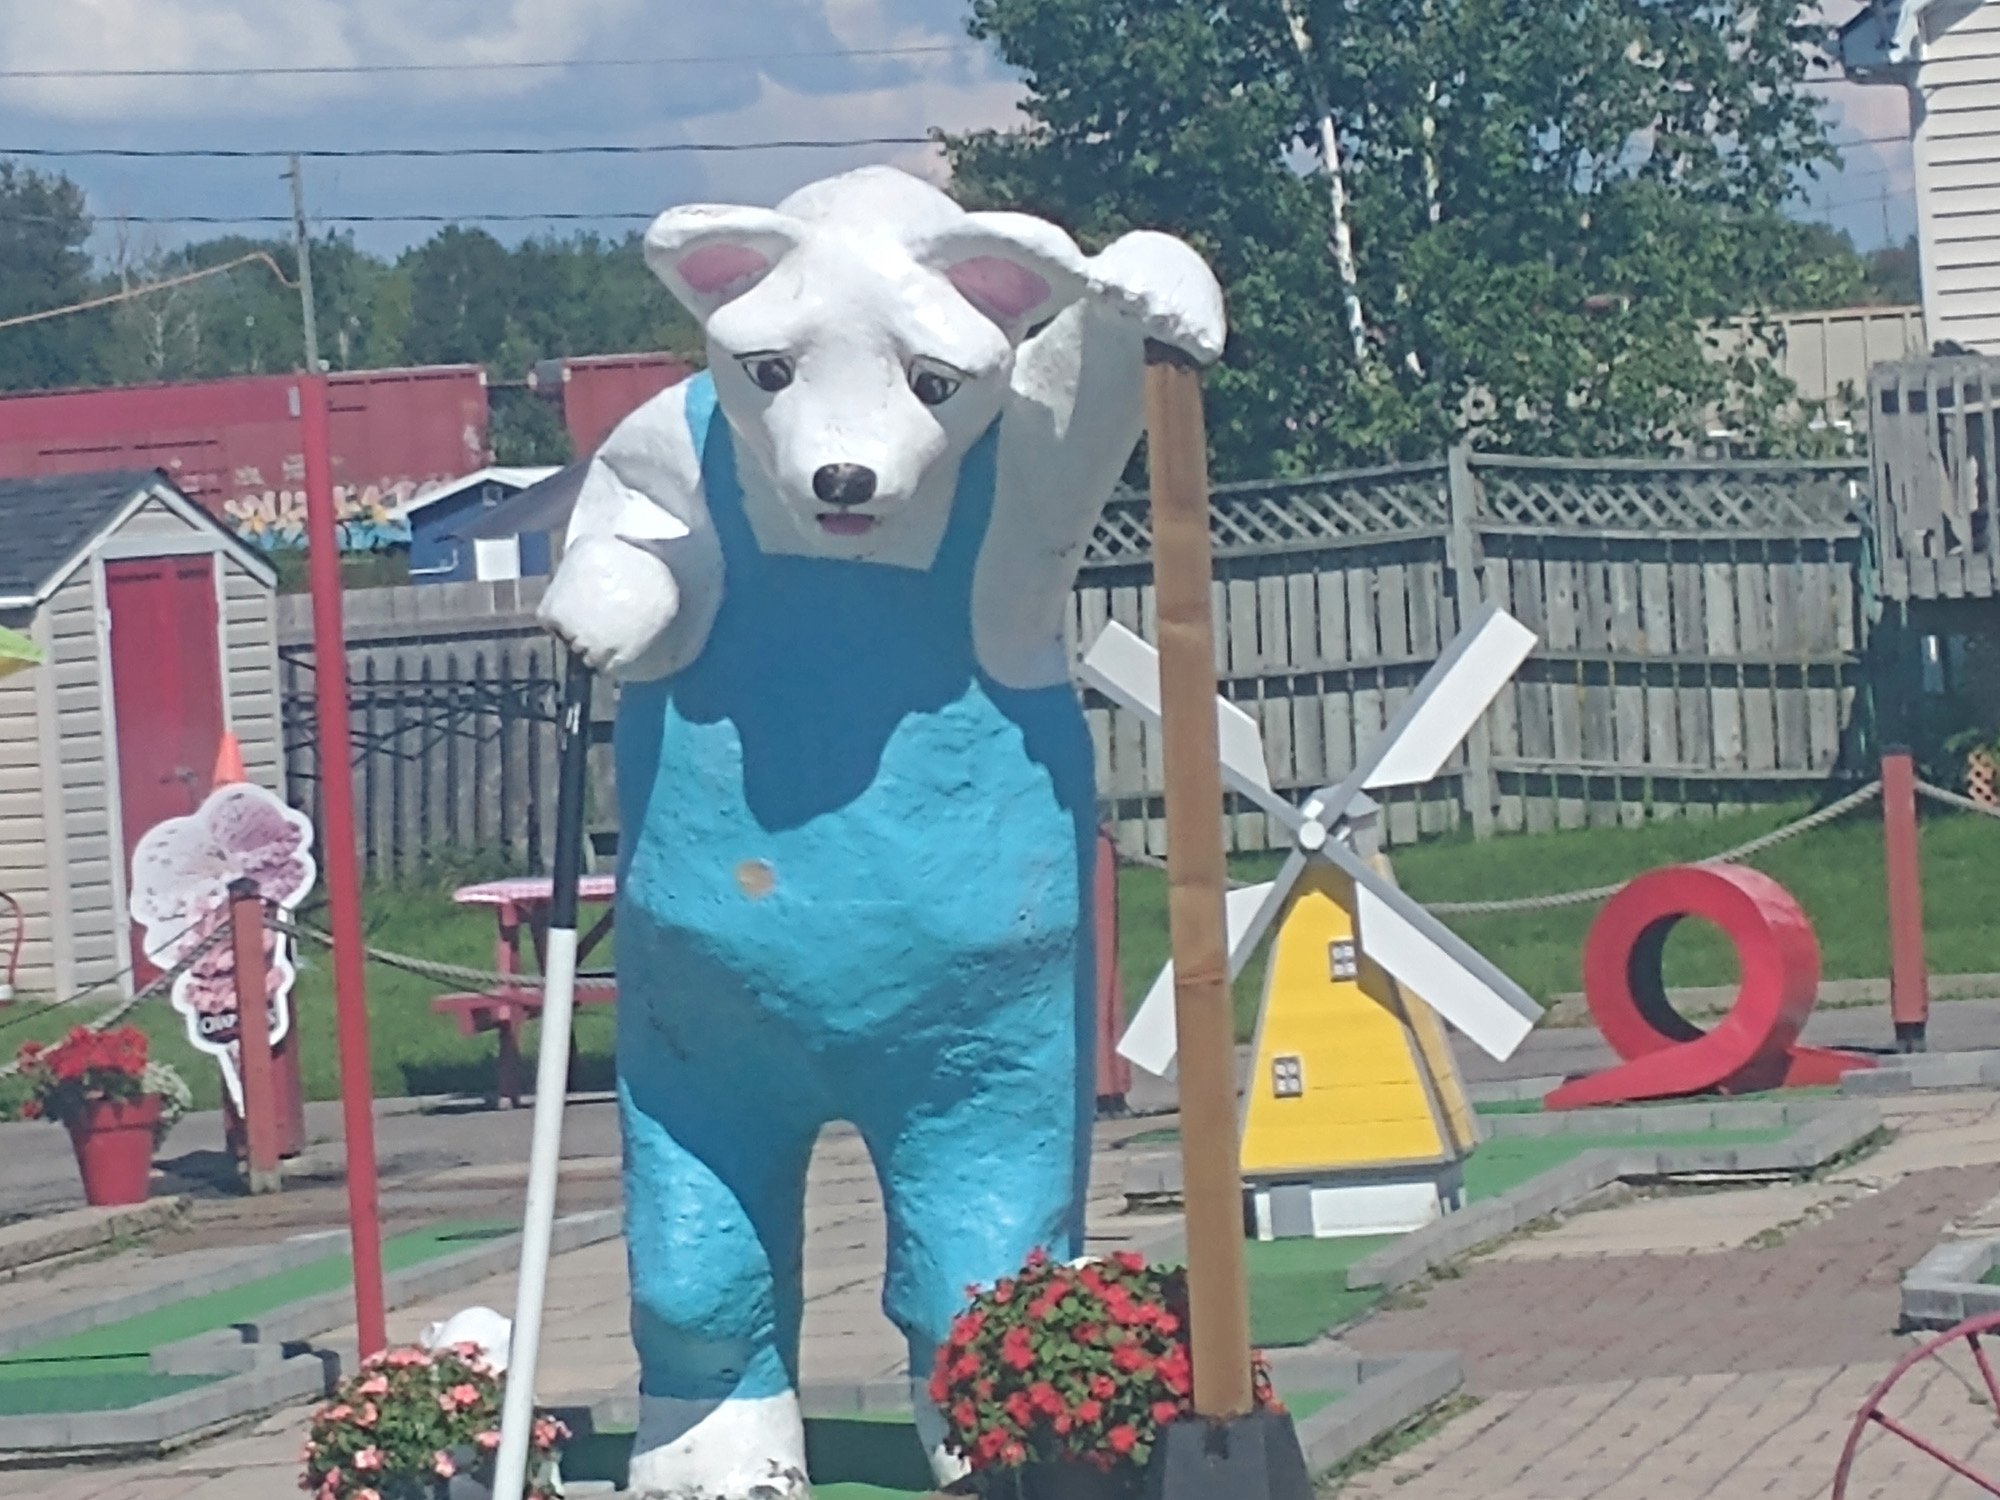 Passed by this sad bear on a mini putt course. 